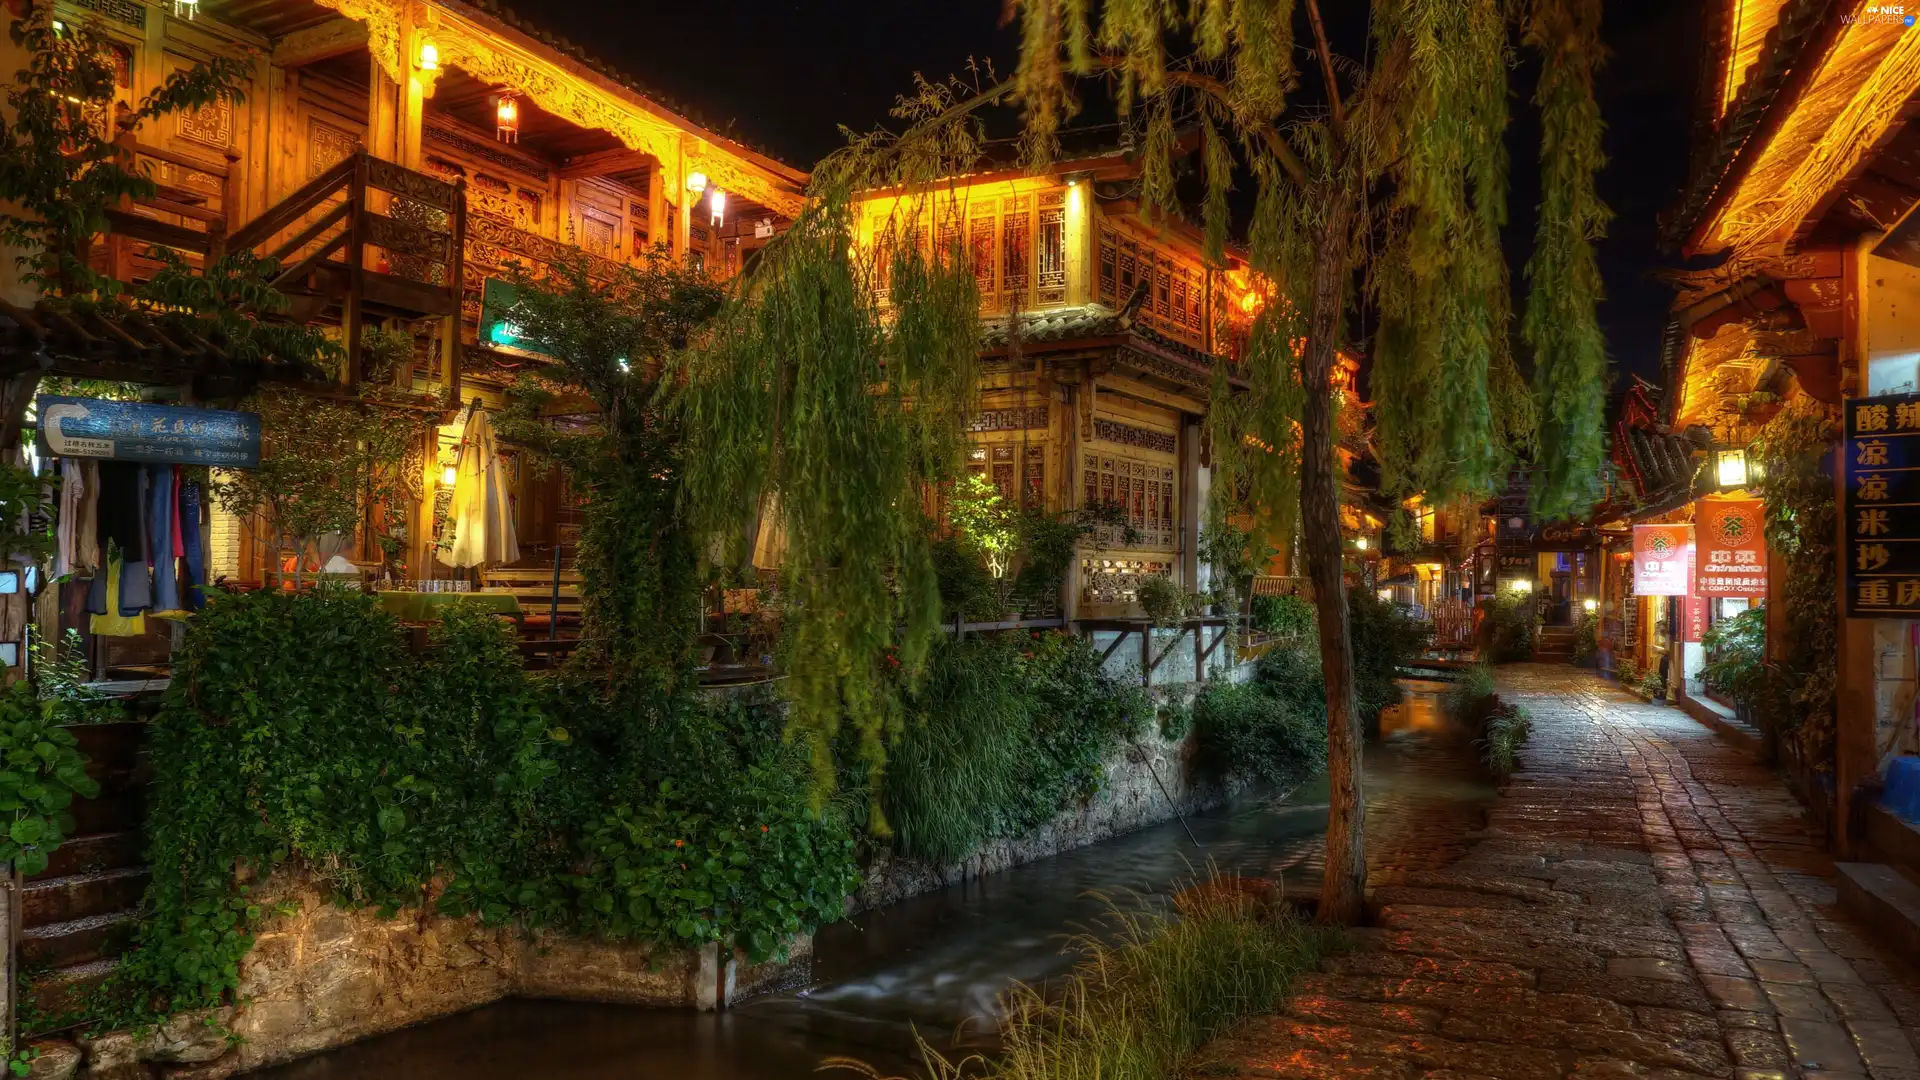 trees, Plants, alley, Restaurant, China